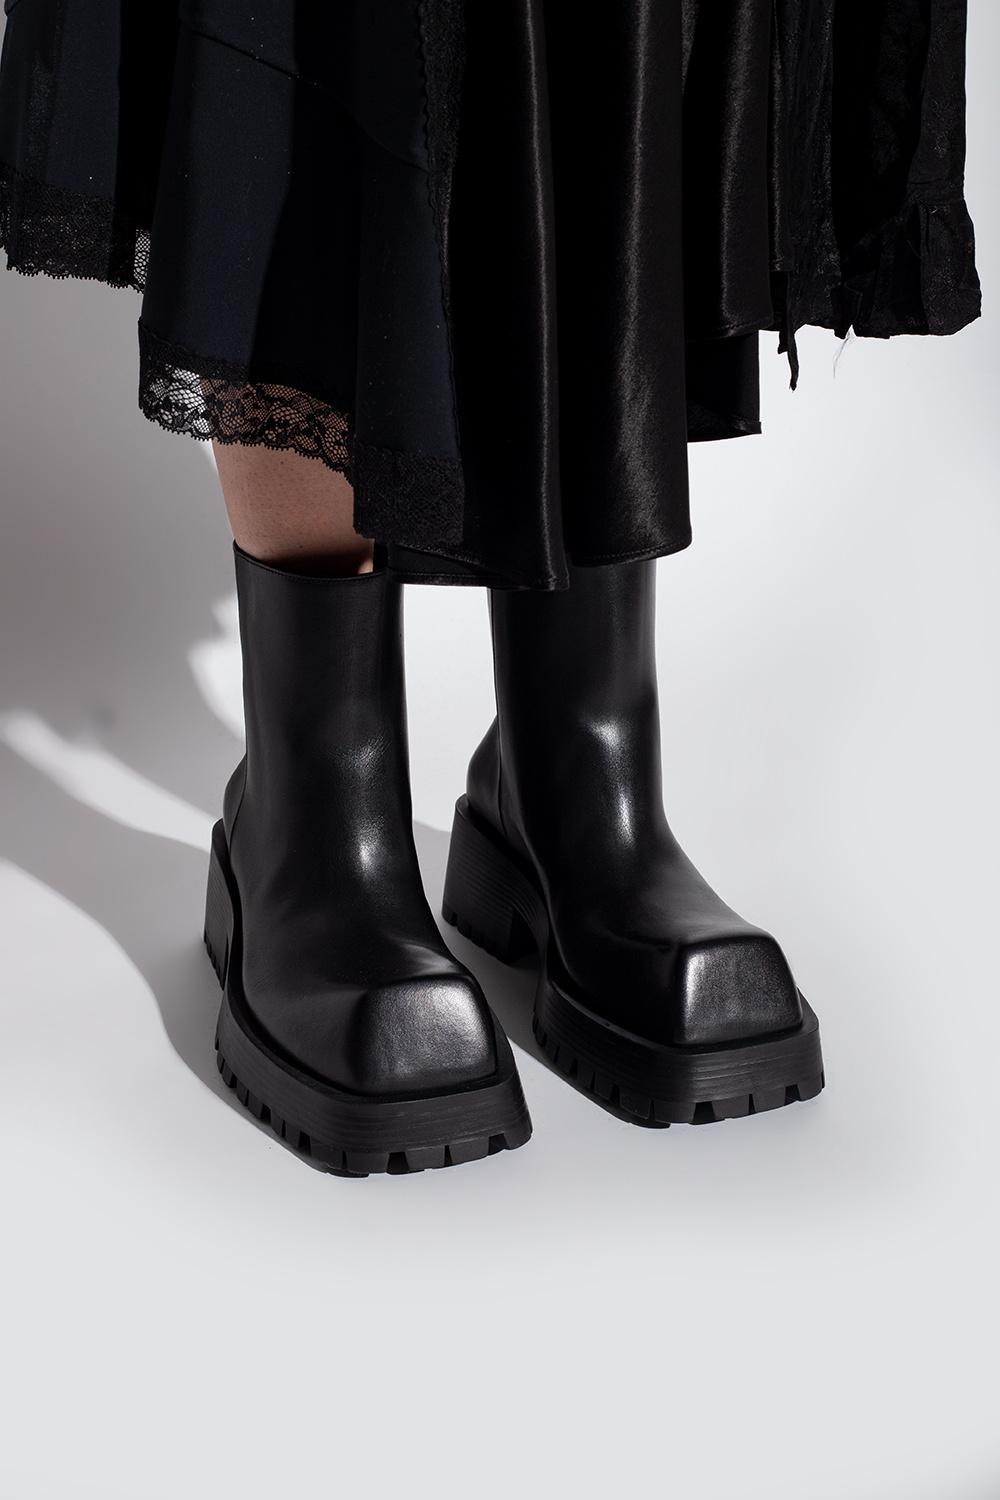 Balenciaga 'trooper' Ankle Boots in Black | Lyst